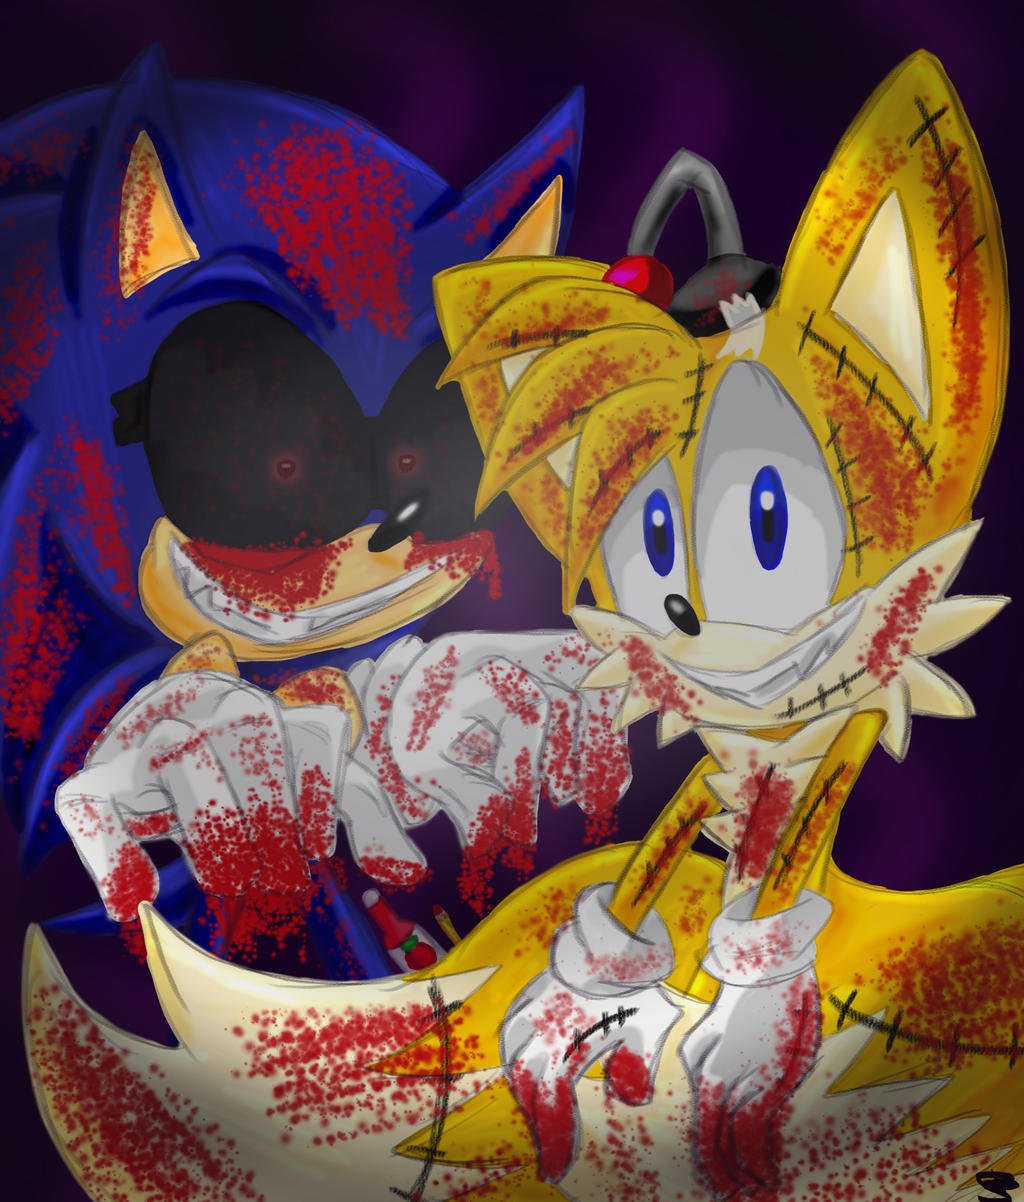 Sonic Exe and Tails Doll(2018) by PiRoG-Art on DeviantArt